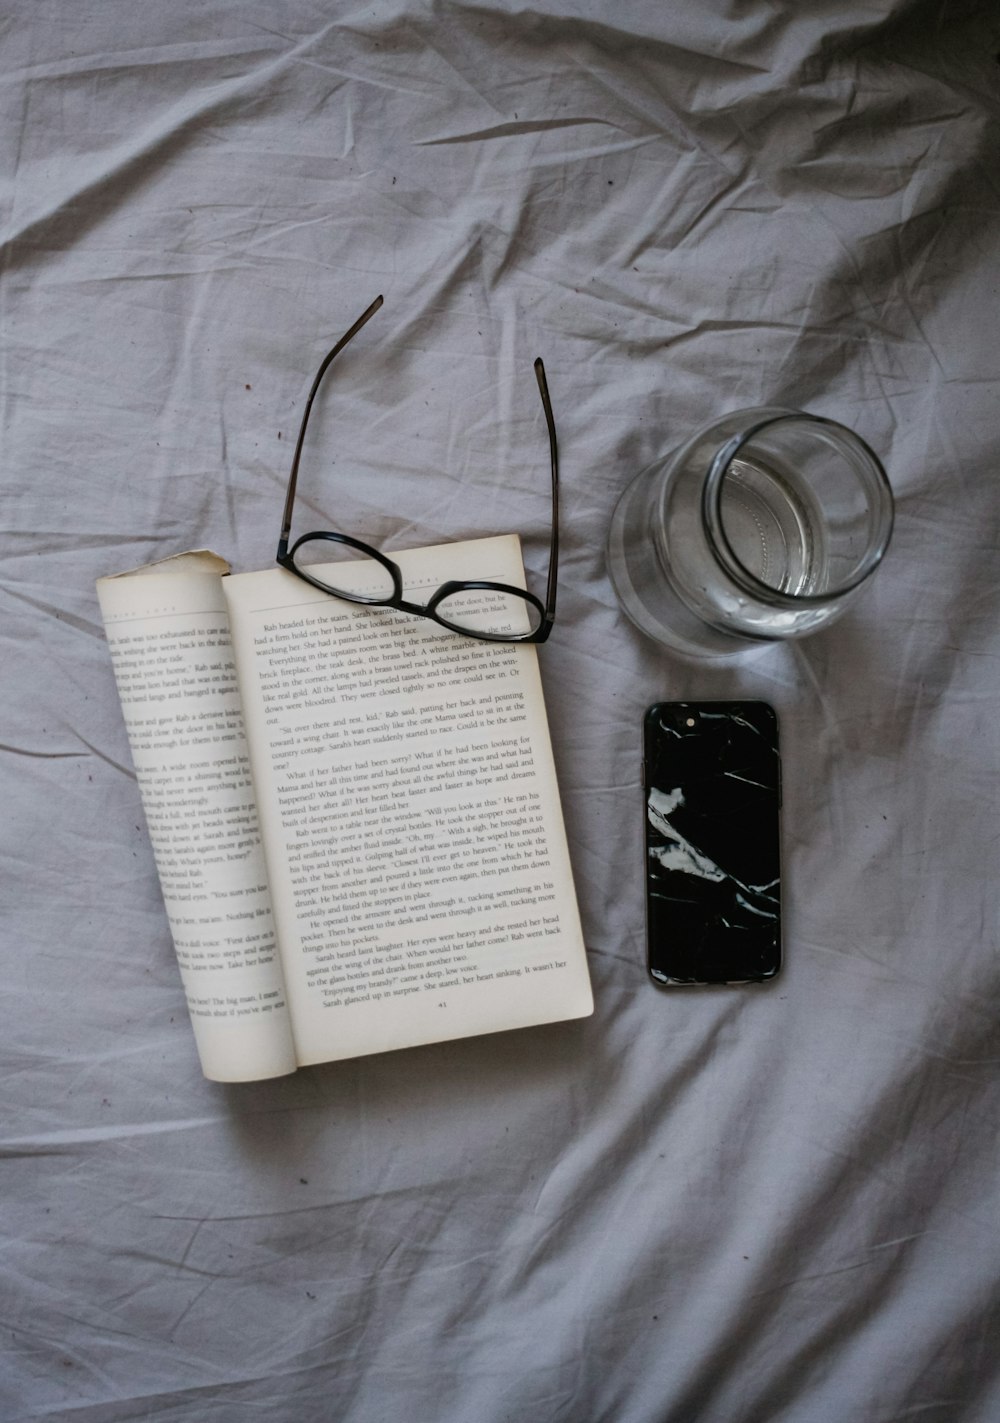 smartphone, opened book, eyeglasses, and drinking glass